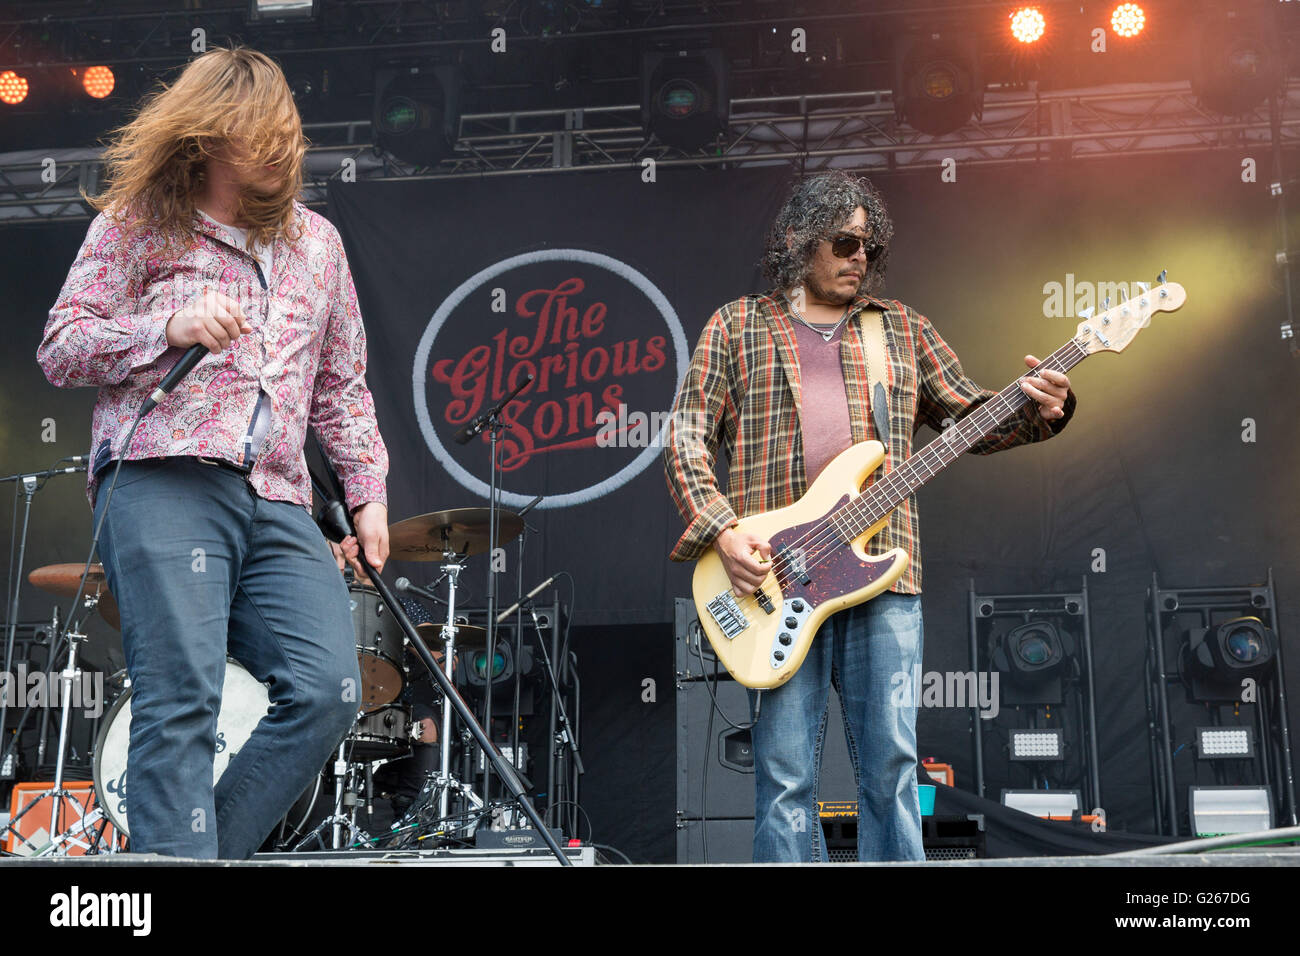 Columbus, Ohio, USA. 22nd May, 2016. BRETT EMMONS (L) and CHRIS HUOT of The Glorious Sons perform live during Rock on the Range music festival at Columbus Crew Stadium in Columbus, Ohio © Daniel DeSlover/ZUMA Wire/Alamy Live News Stock Photo